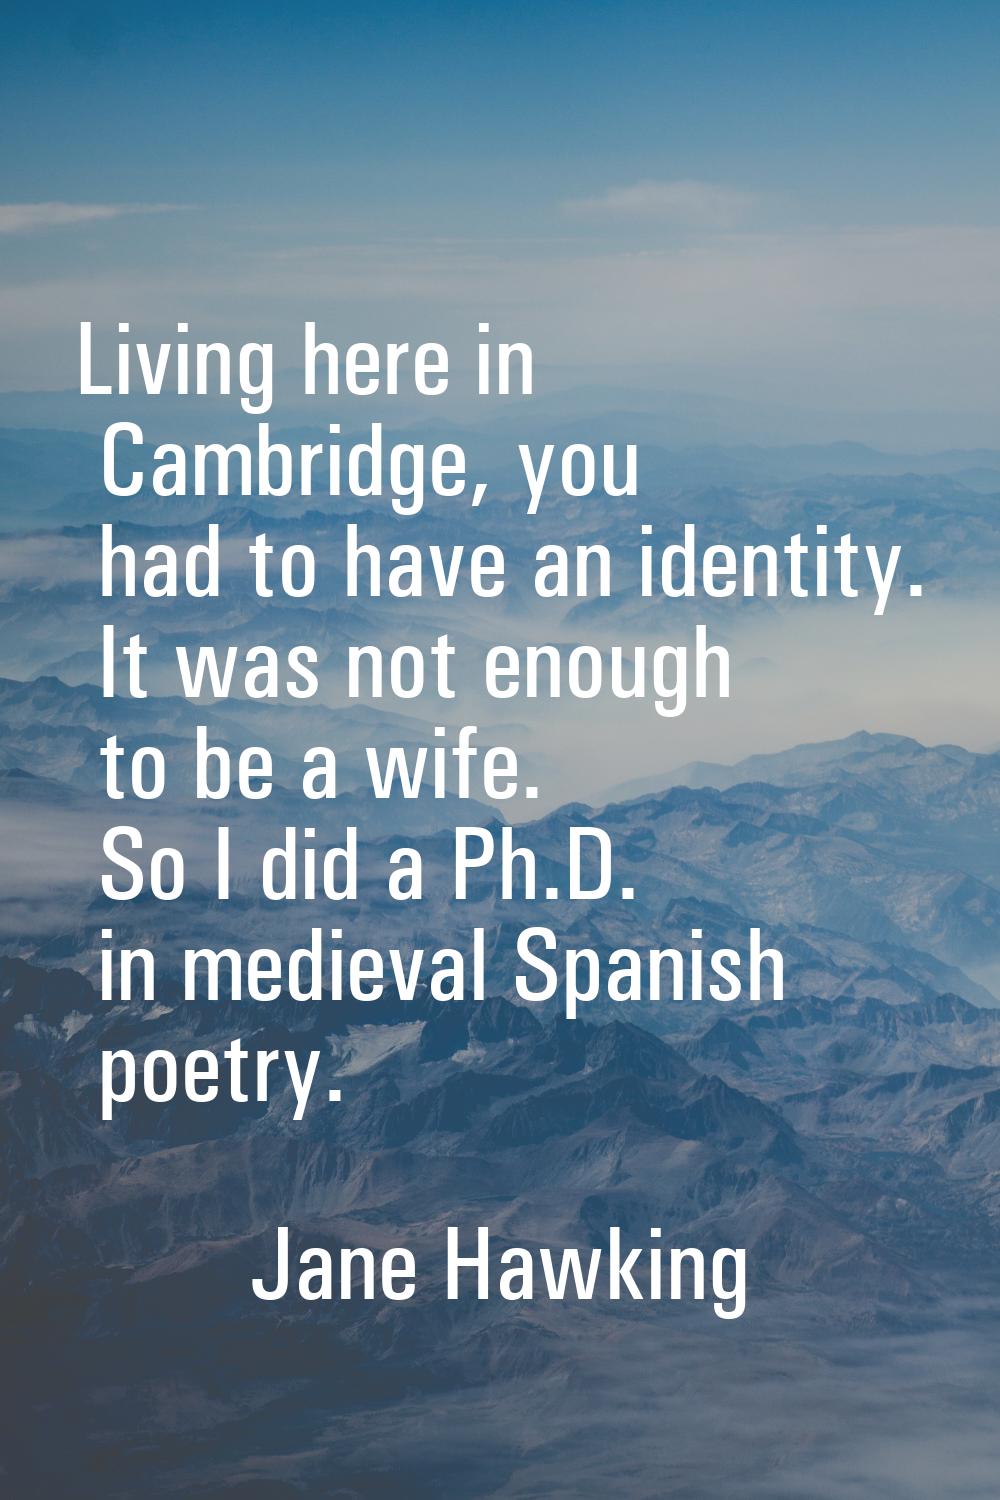 Living here in Cambridge, you had to have an identity. It was not enough to be a wife. So I did a P